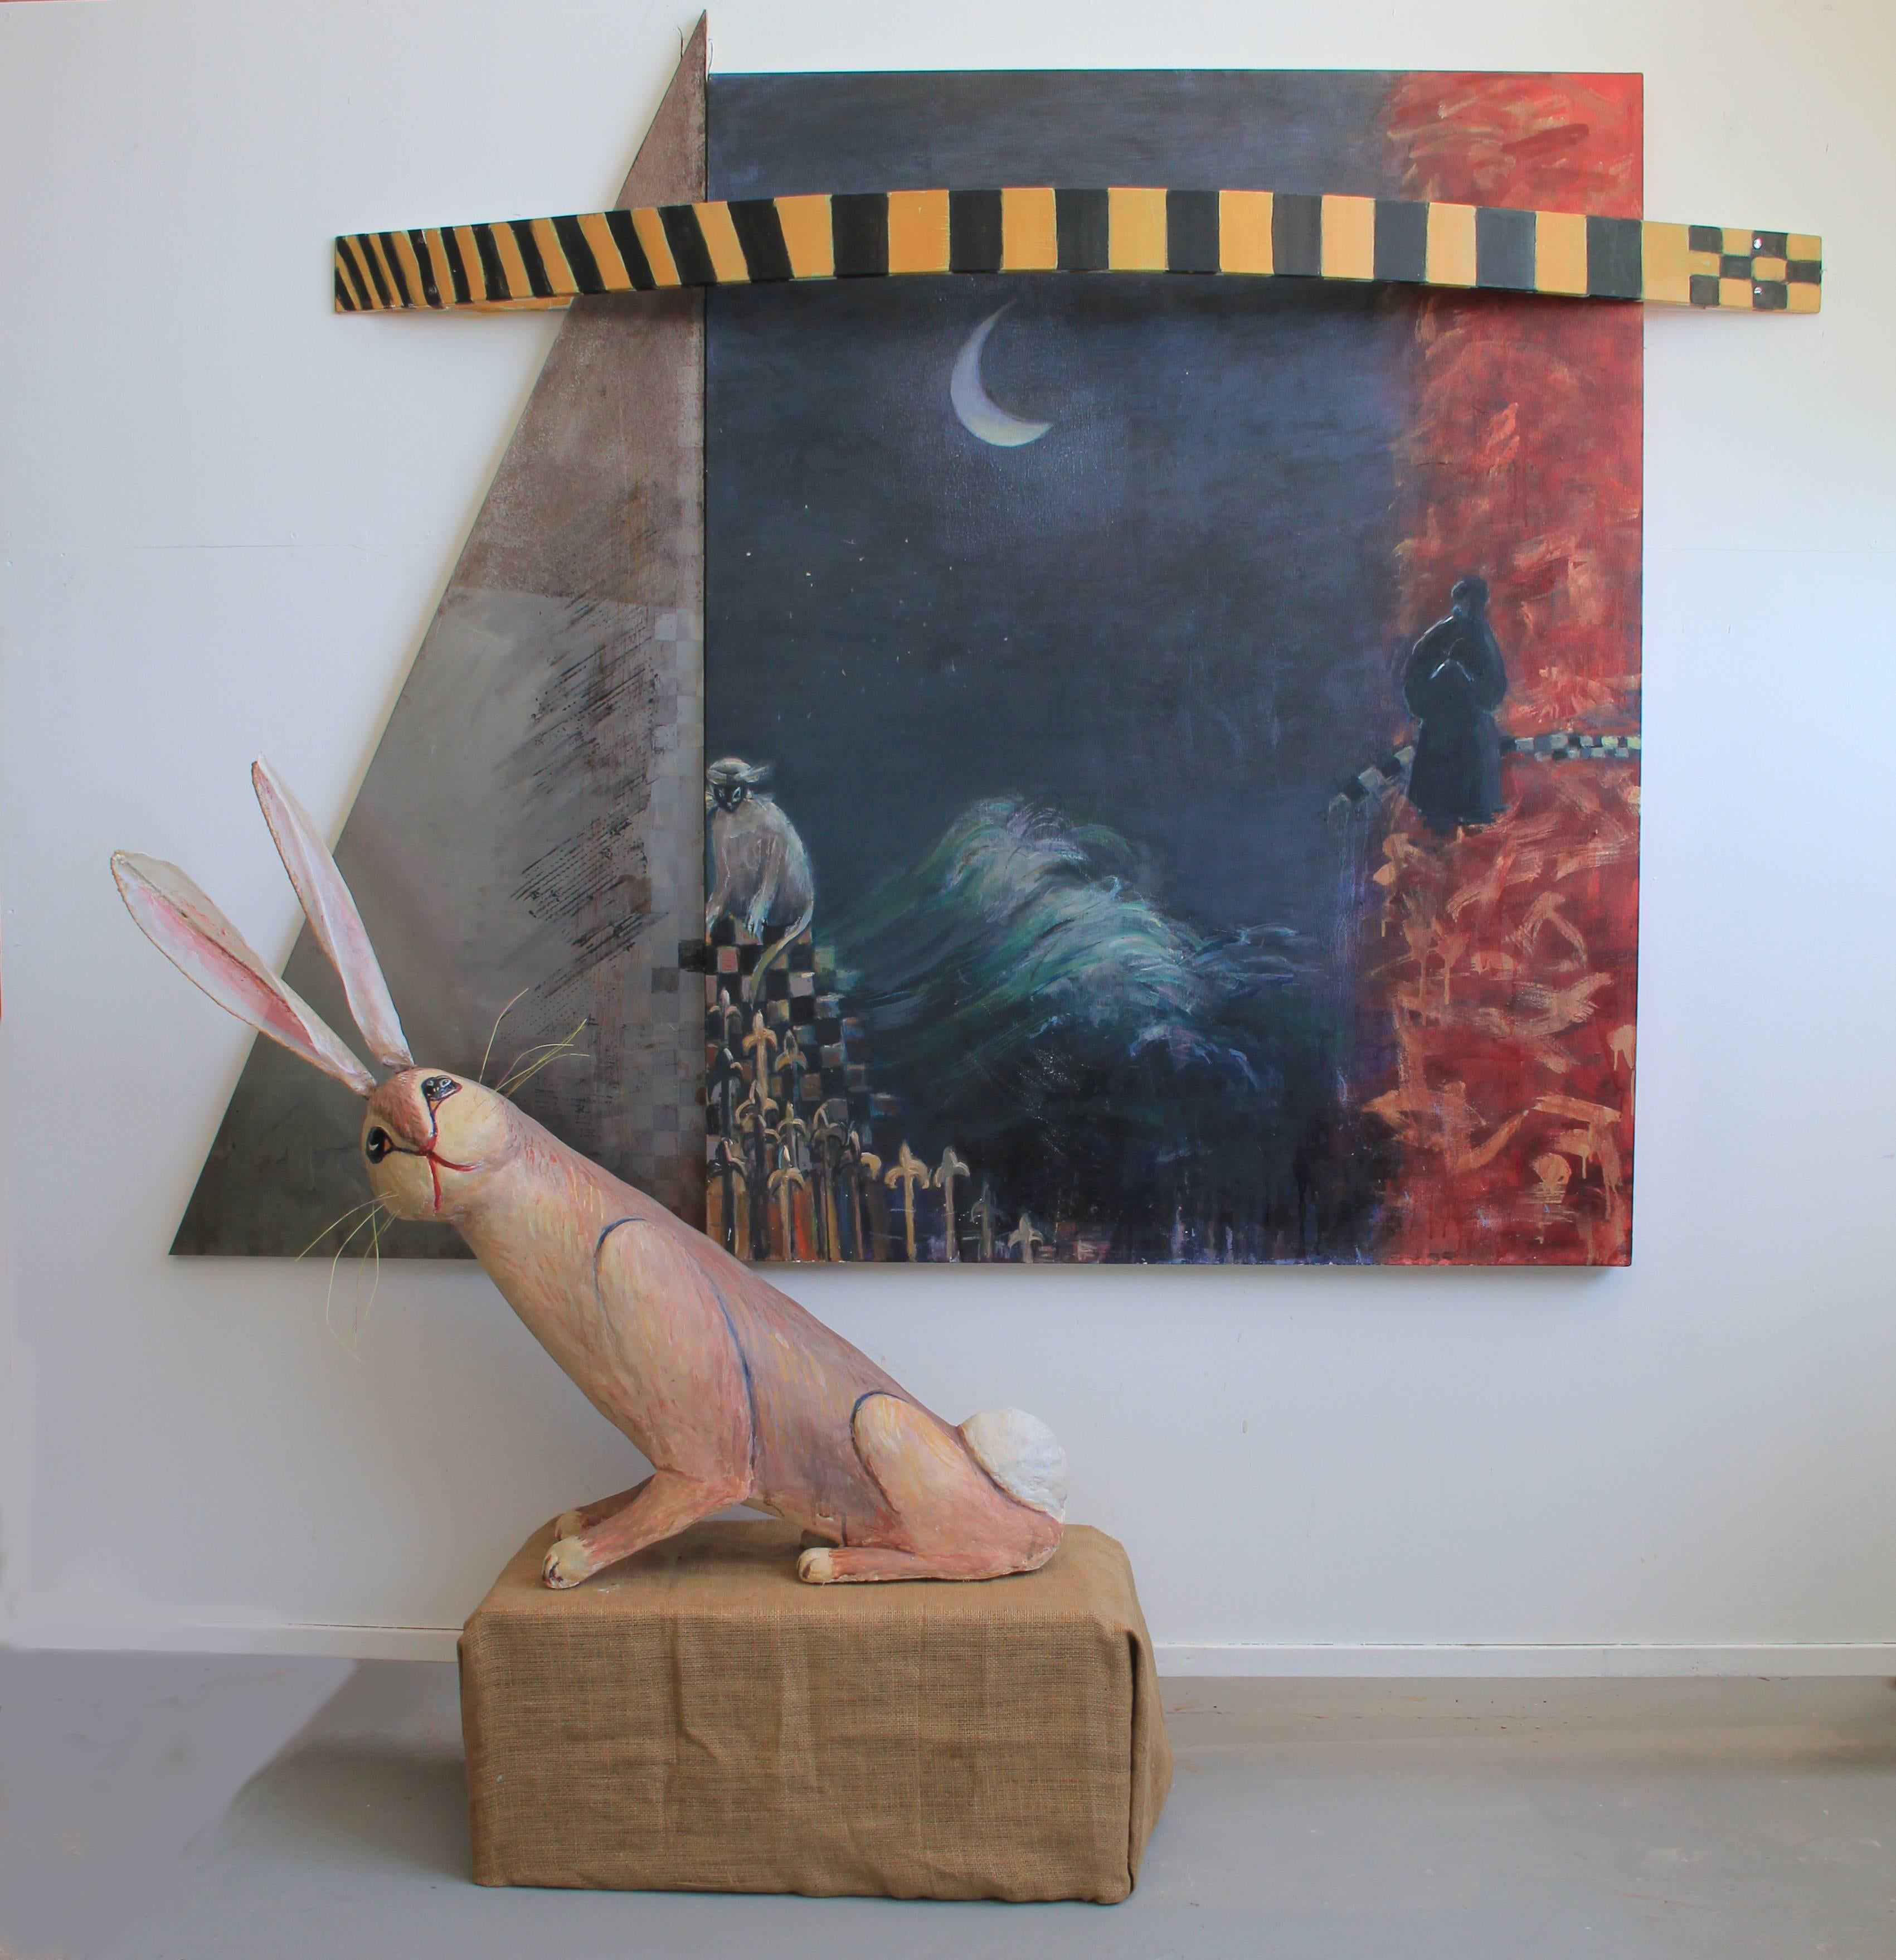 Fables No. 1: Silk and Steel series - mixed media painting and sculpture